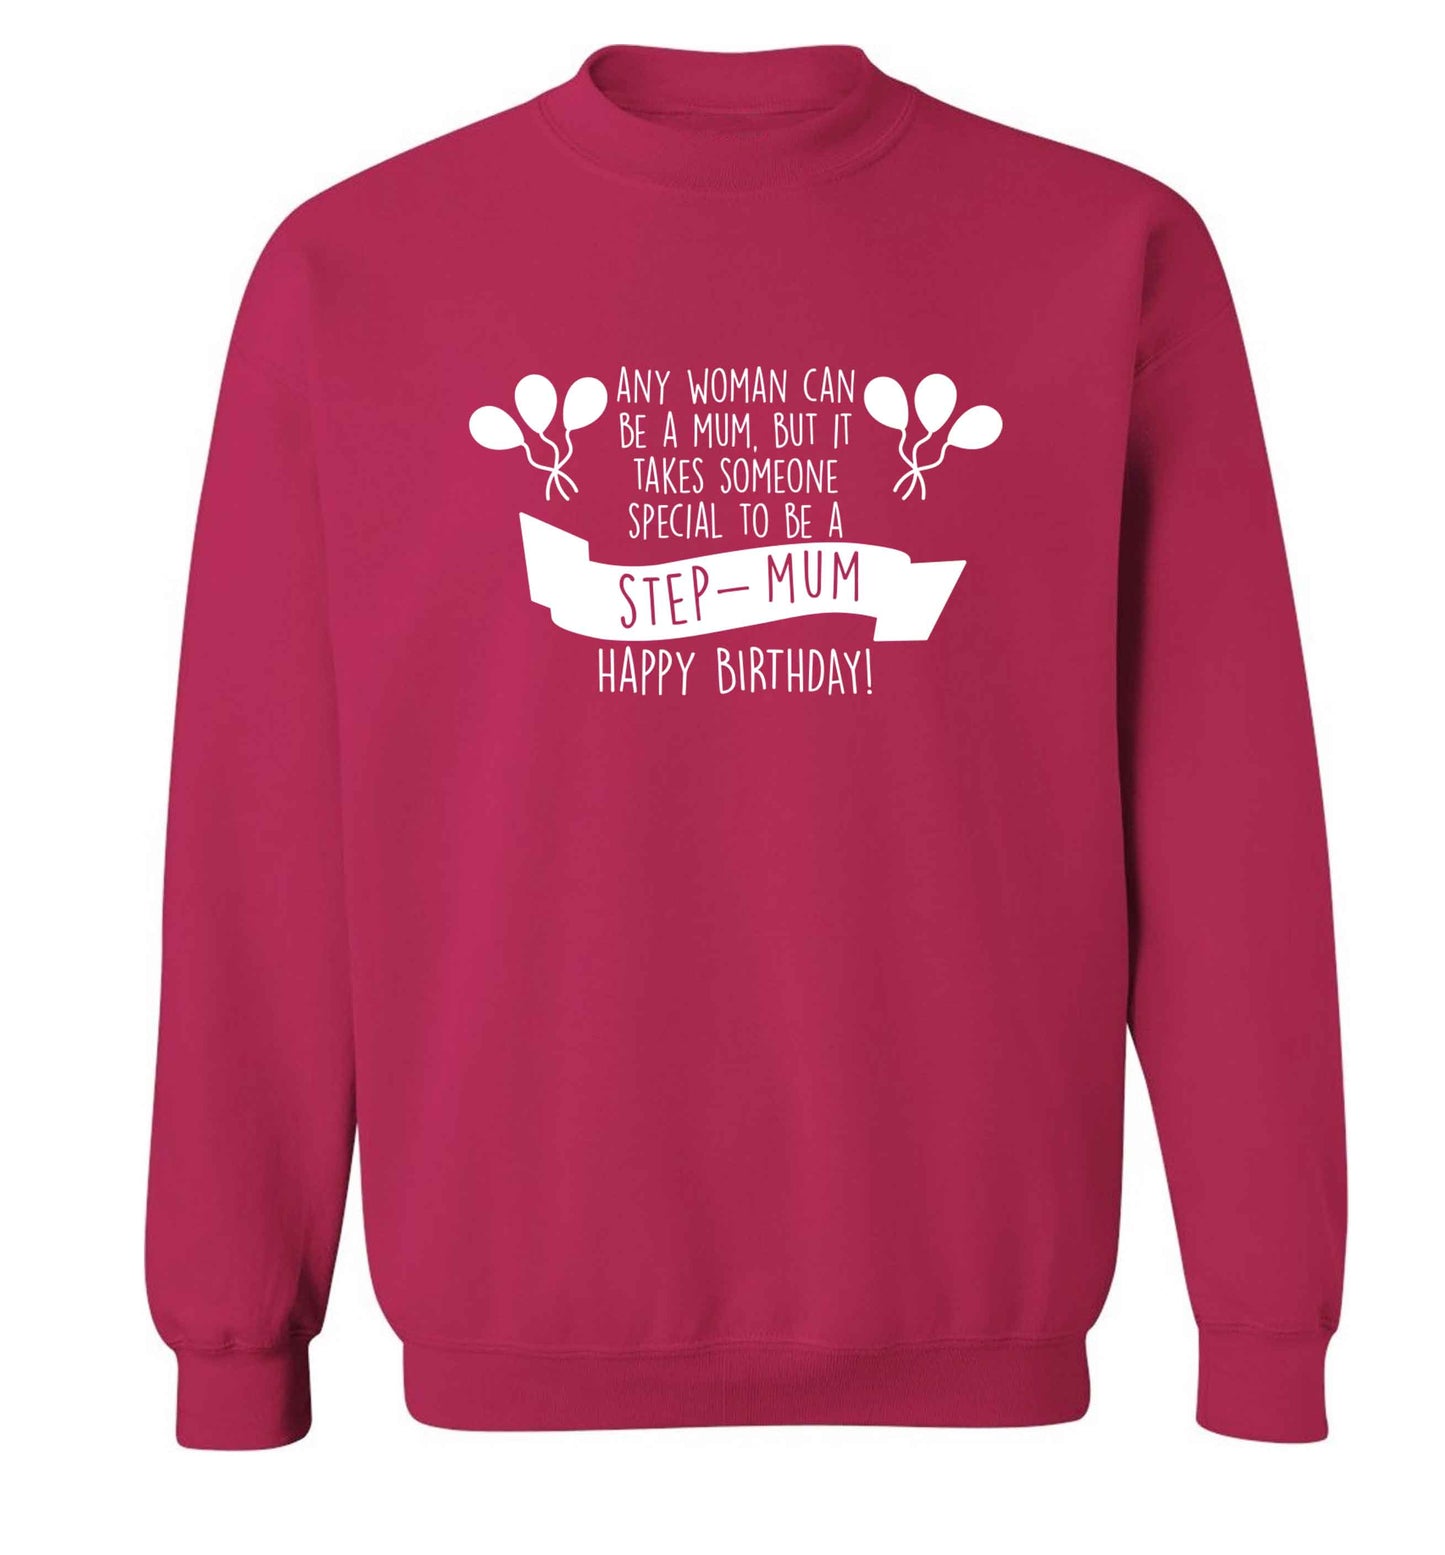 Takes someone special to be a step-mum, happy birthday! adult's unisex pink sweater 2XL